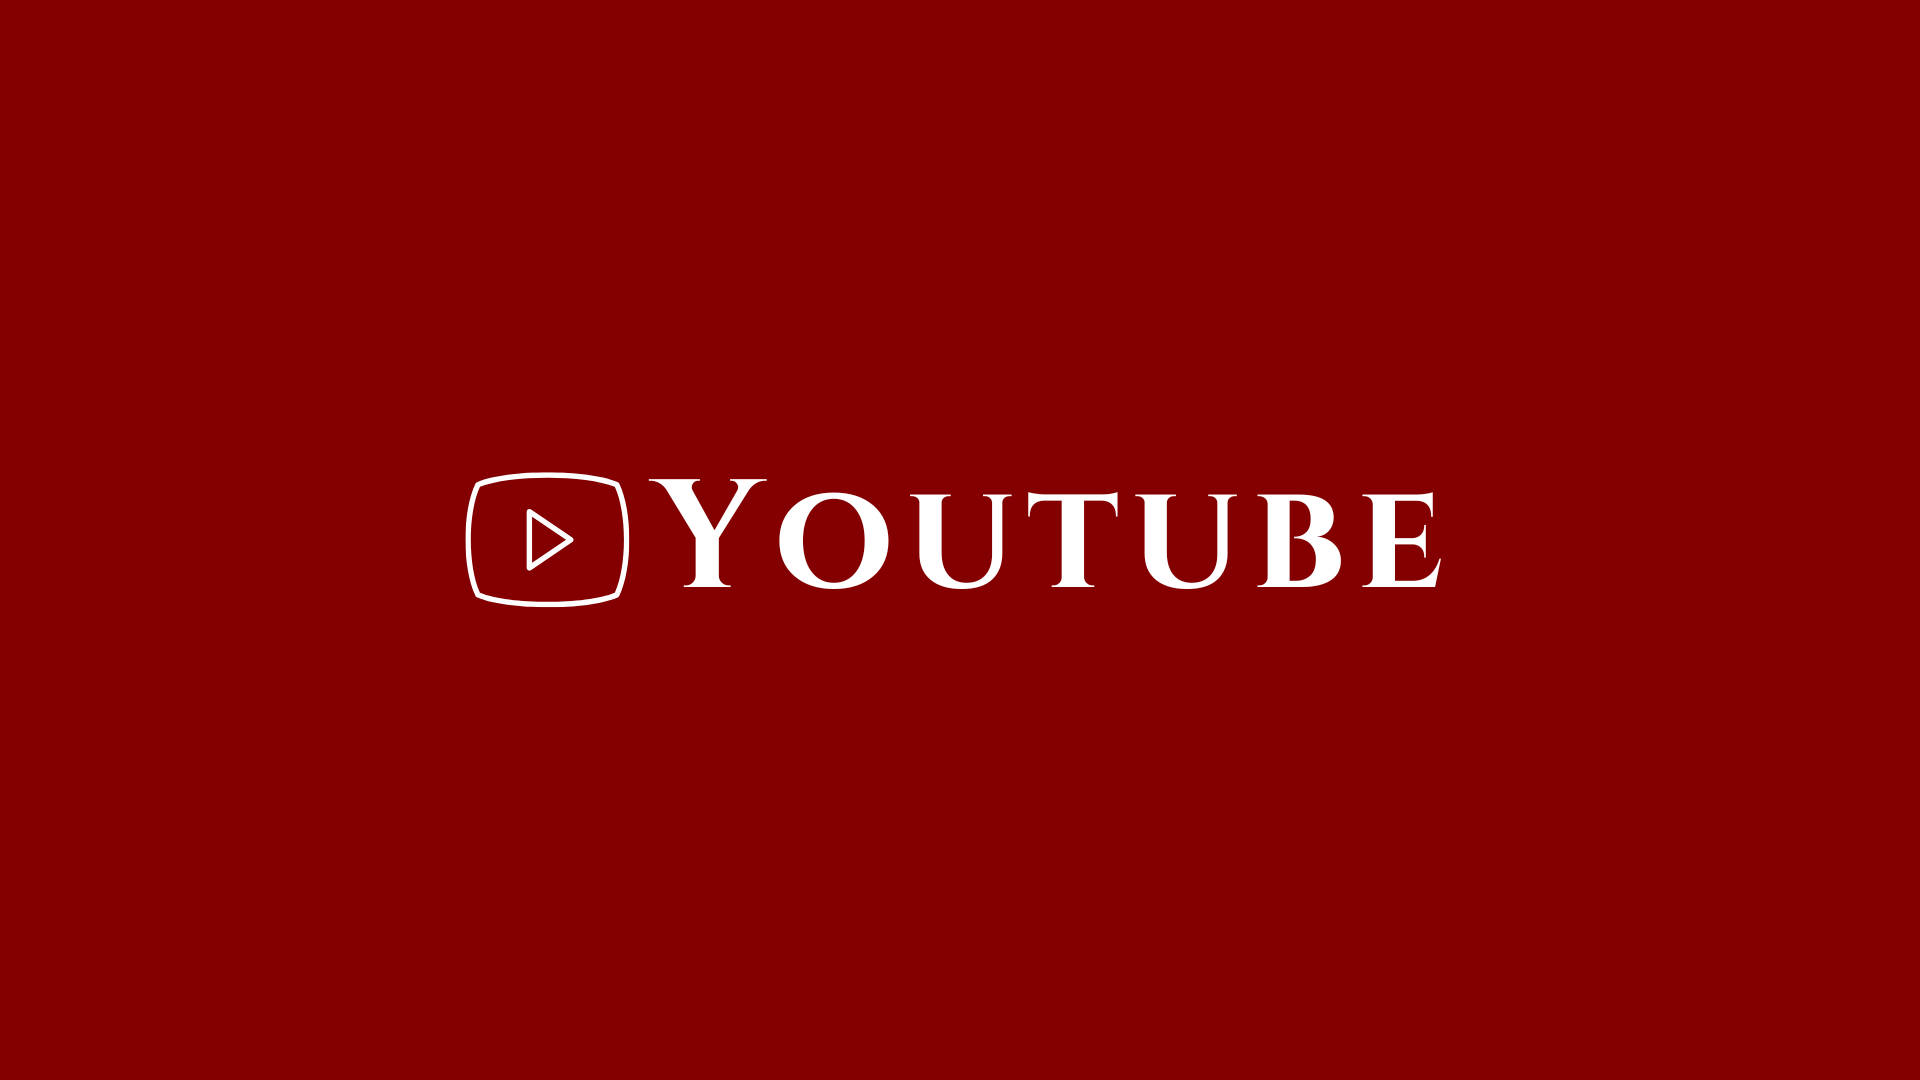 Download Youtube Logo And Name Deep Red Wallpaper 